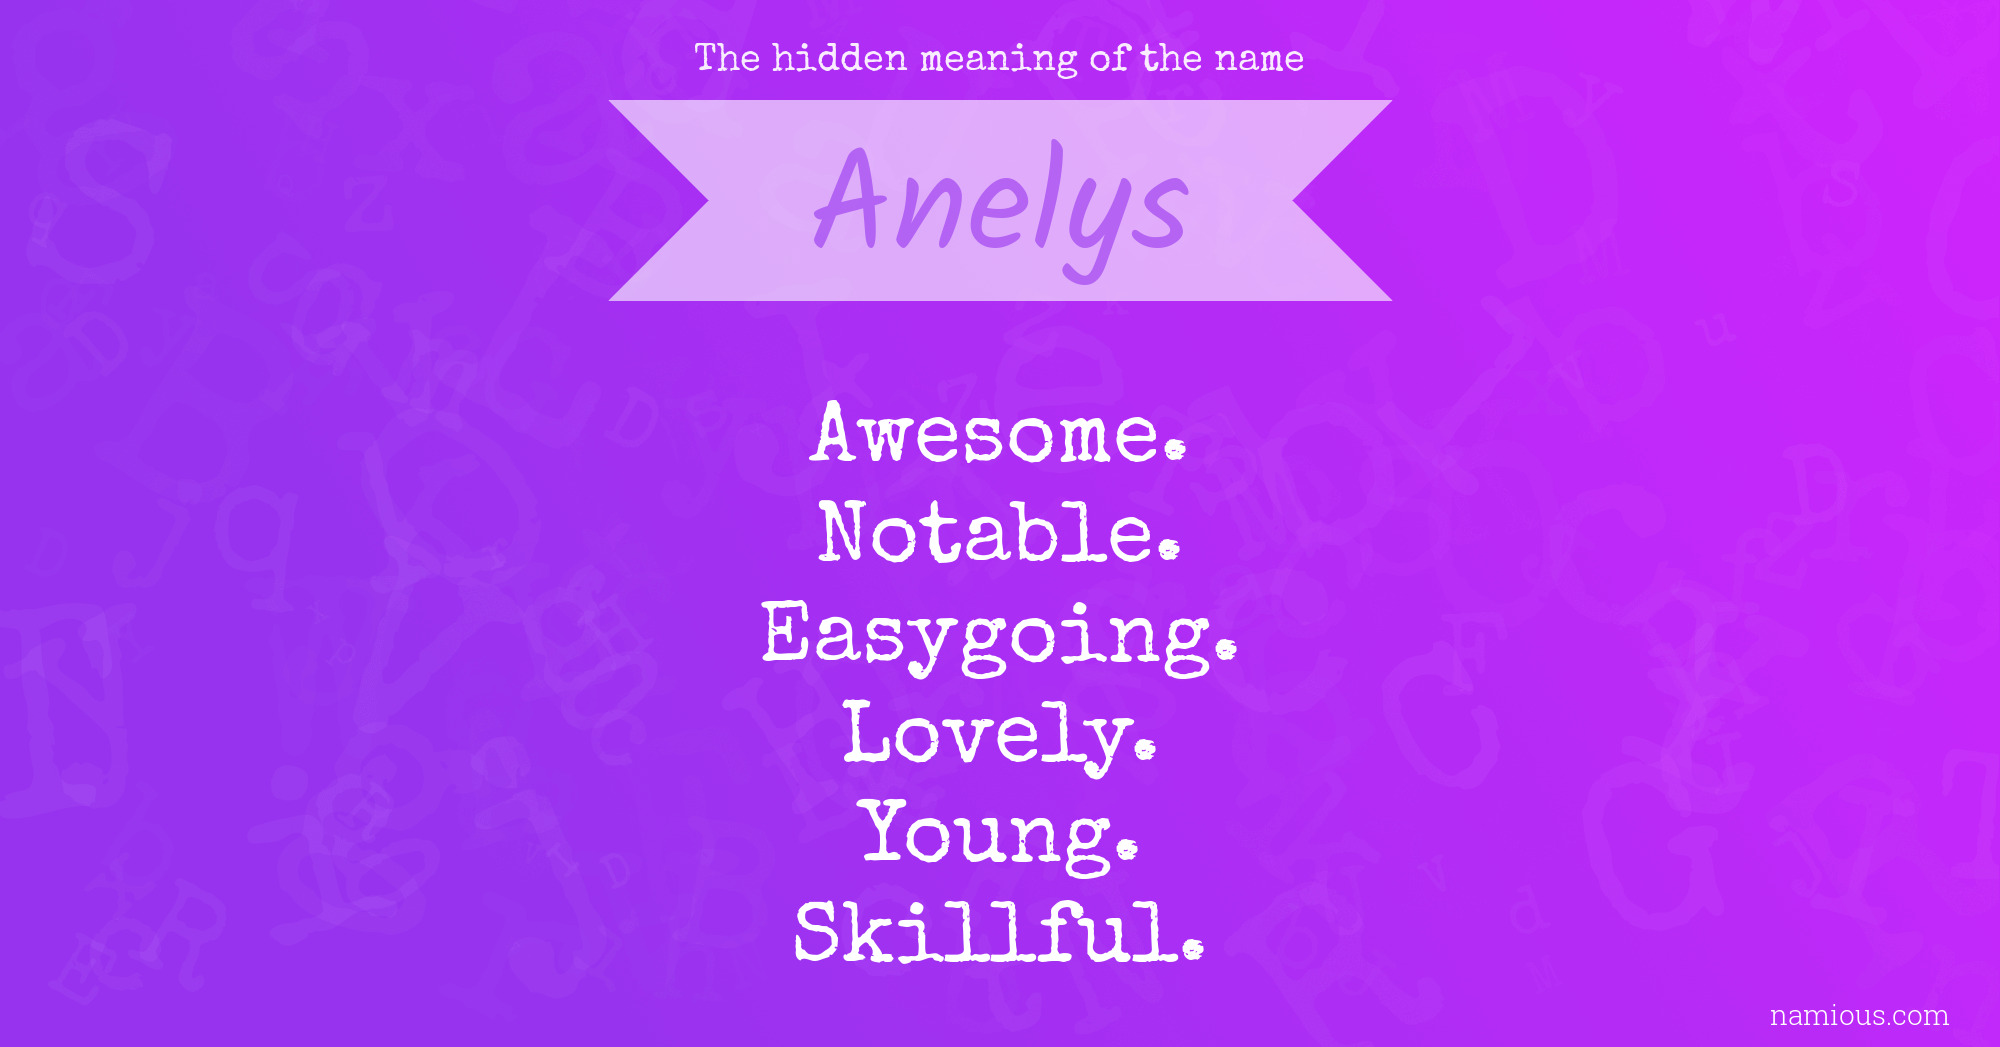 The hidden meaning of the name Anelys